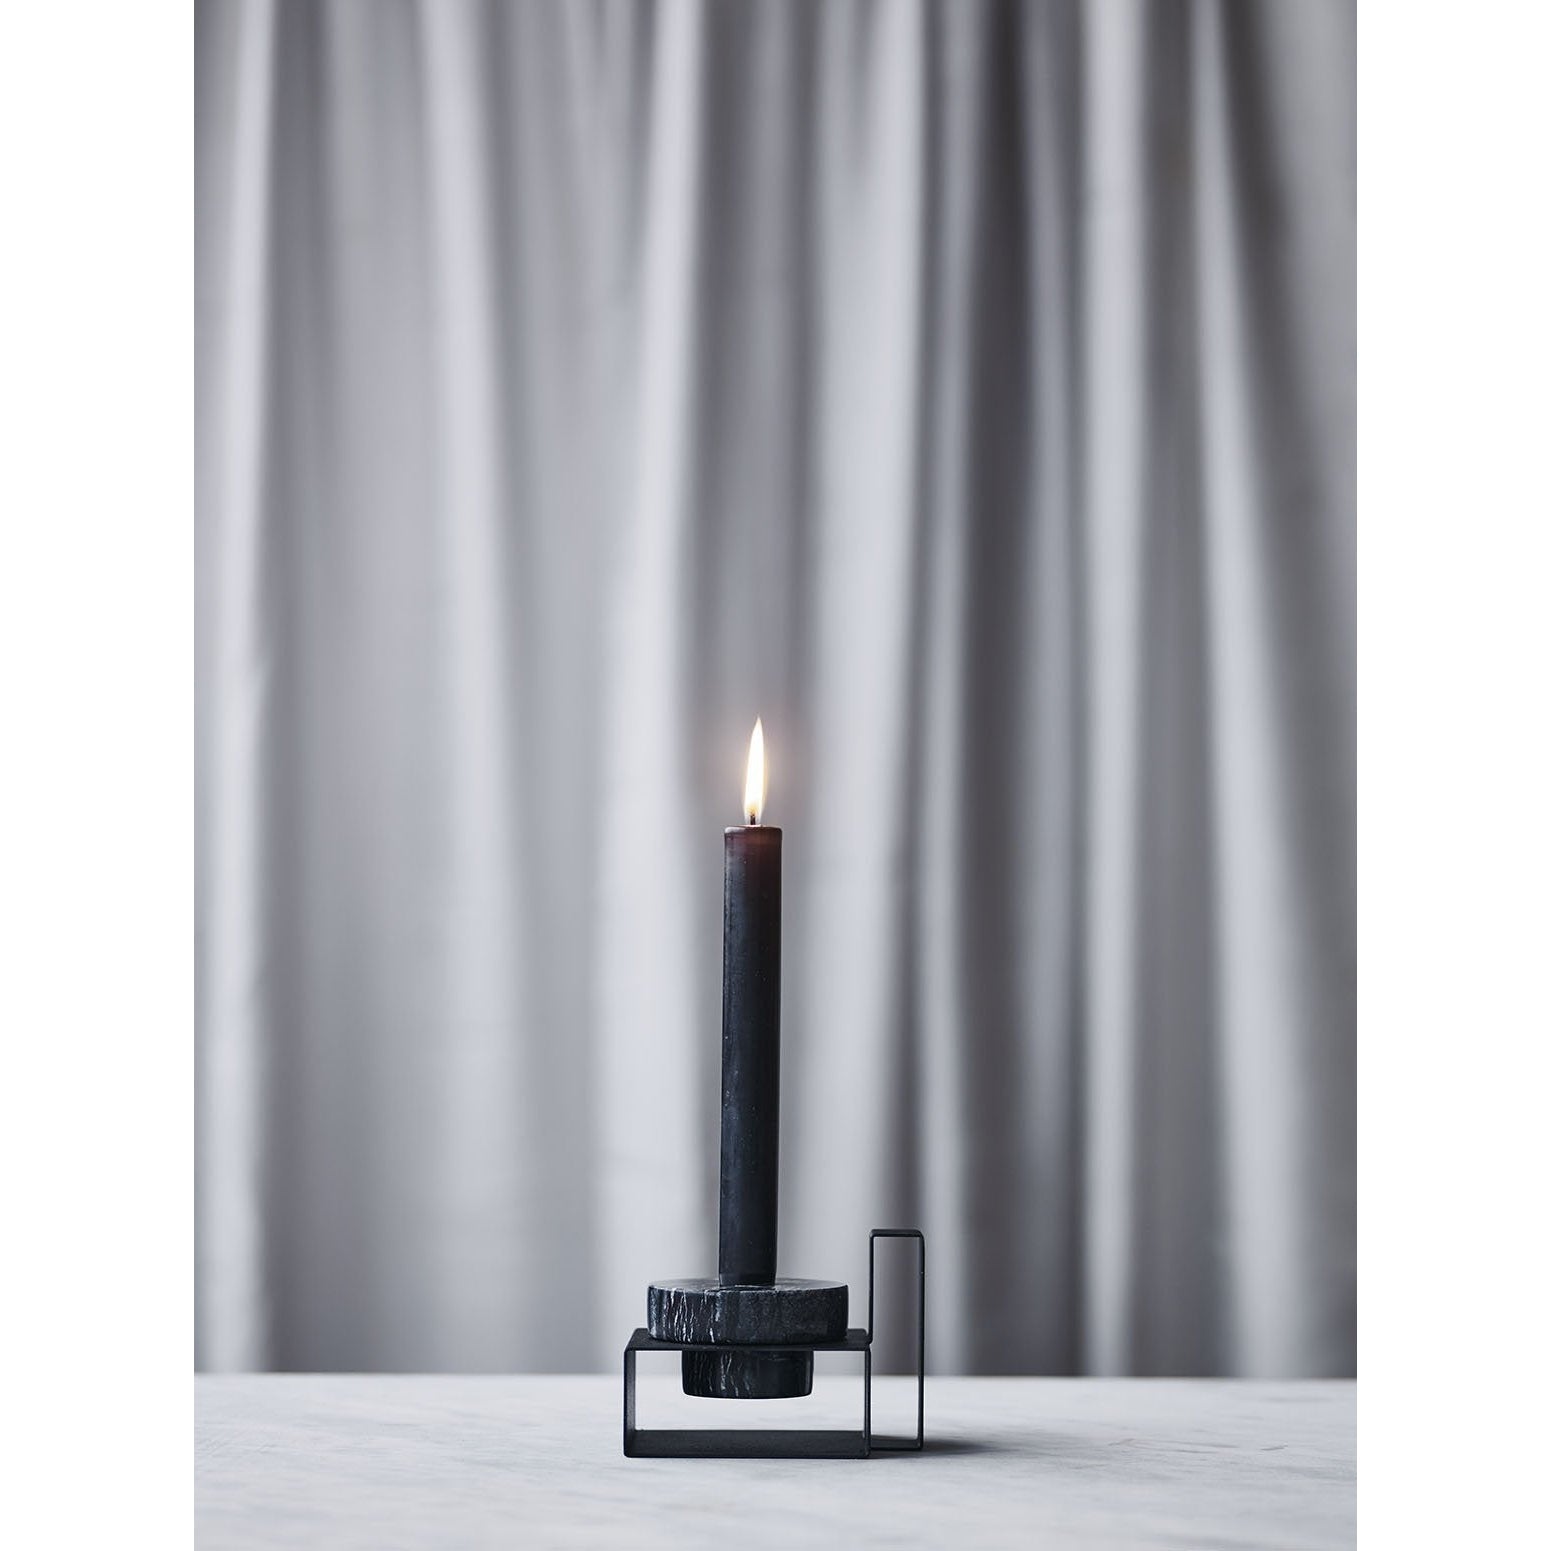 Lucie Kaas Marco Candlestick White, 8cm